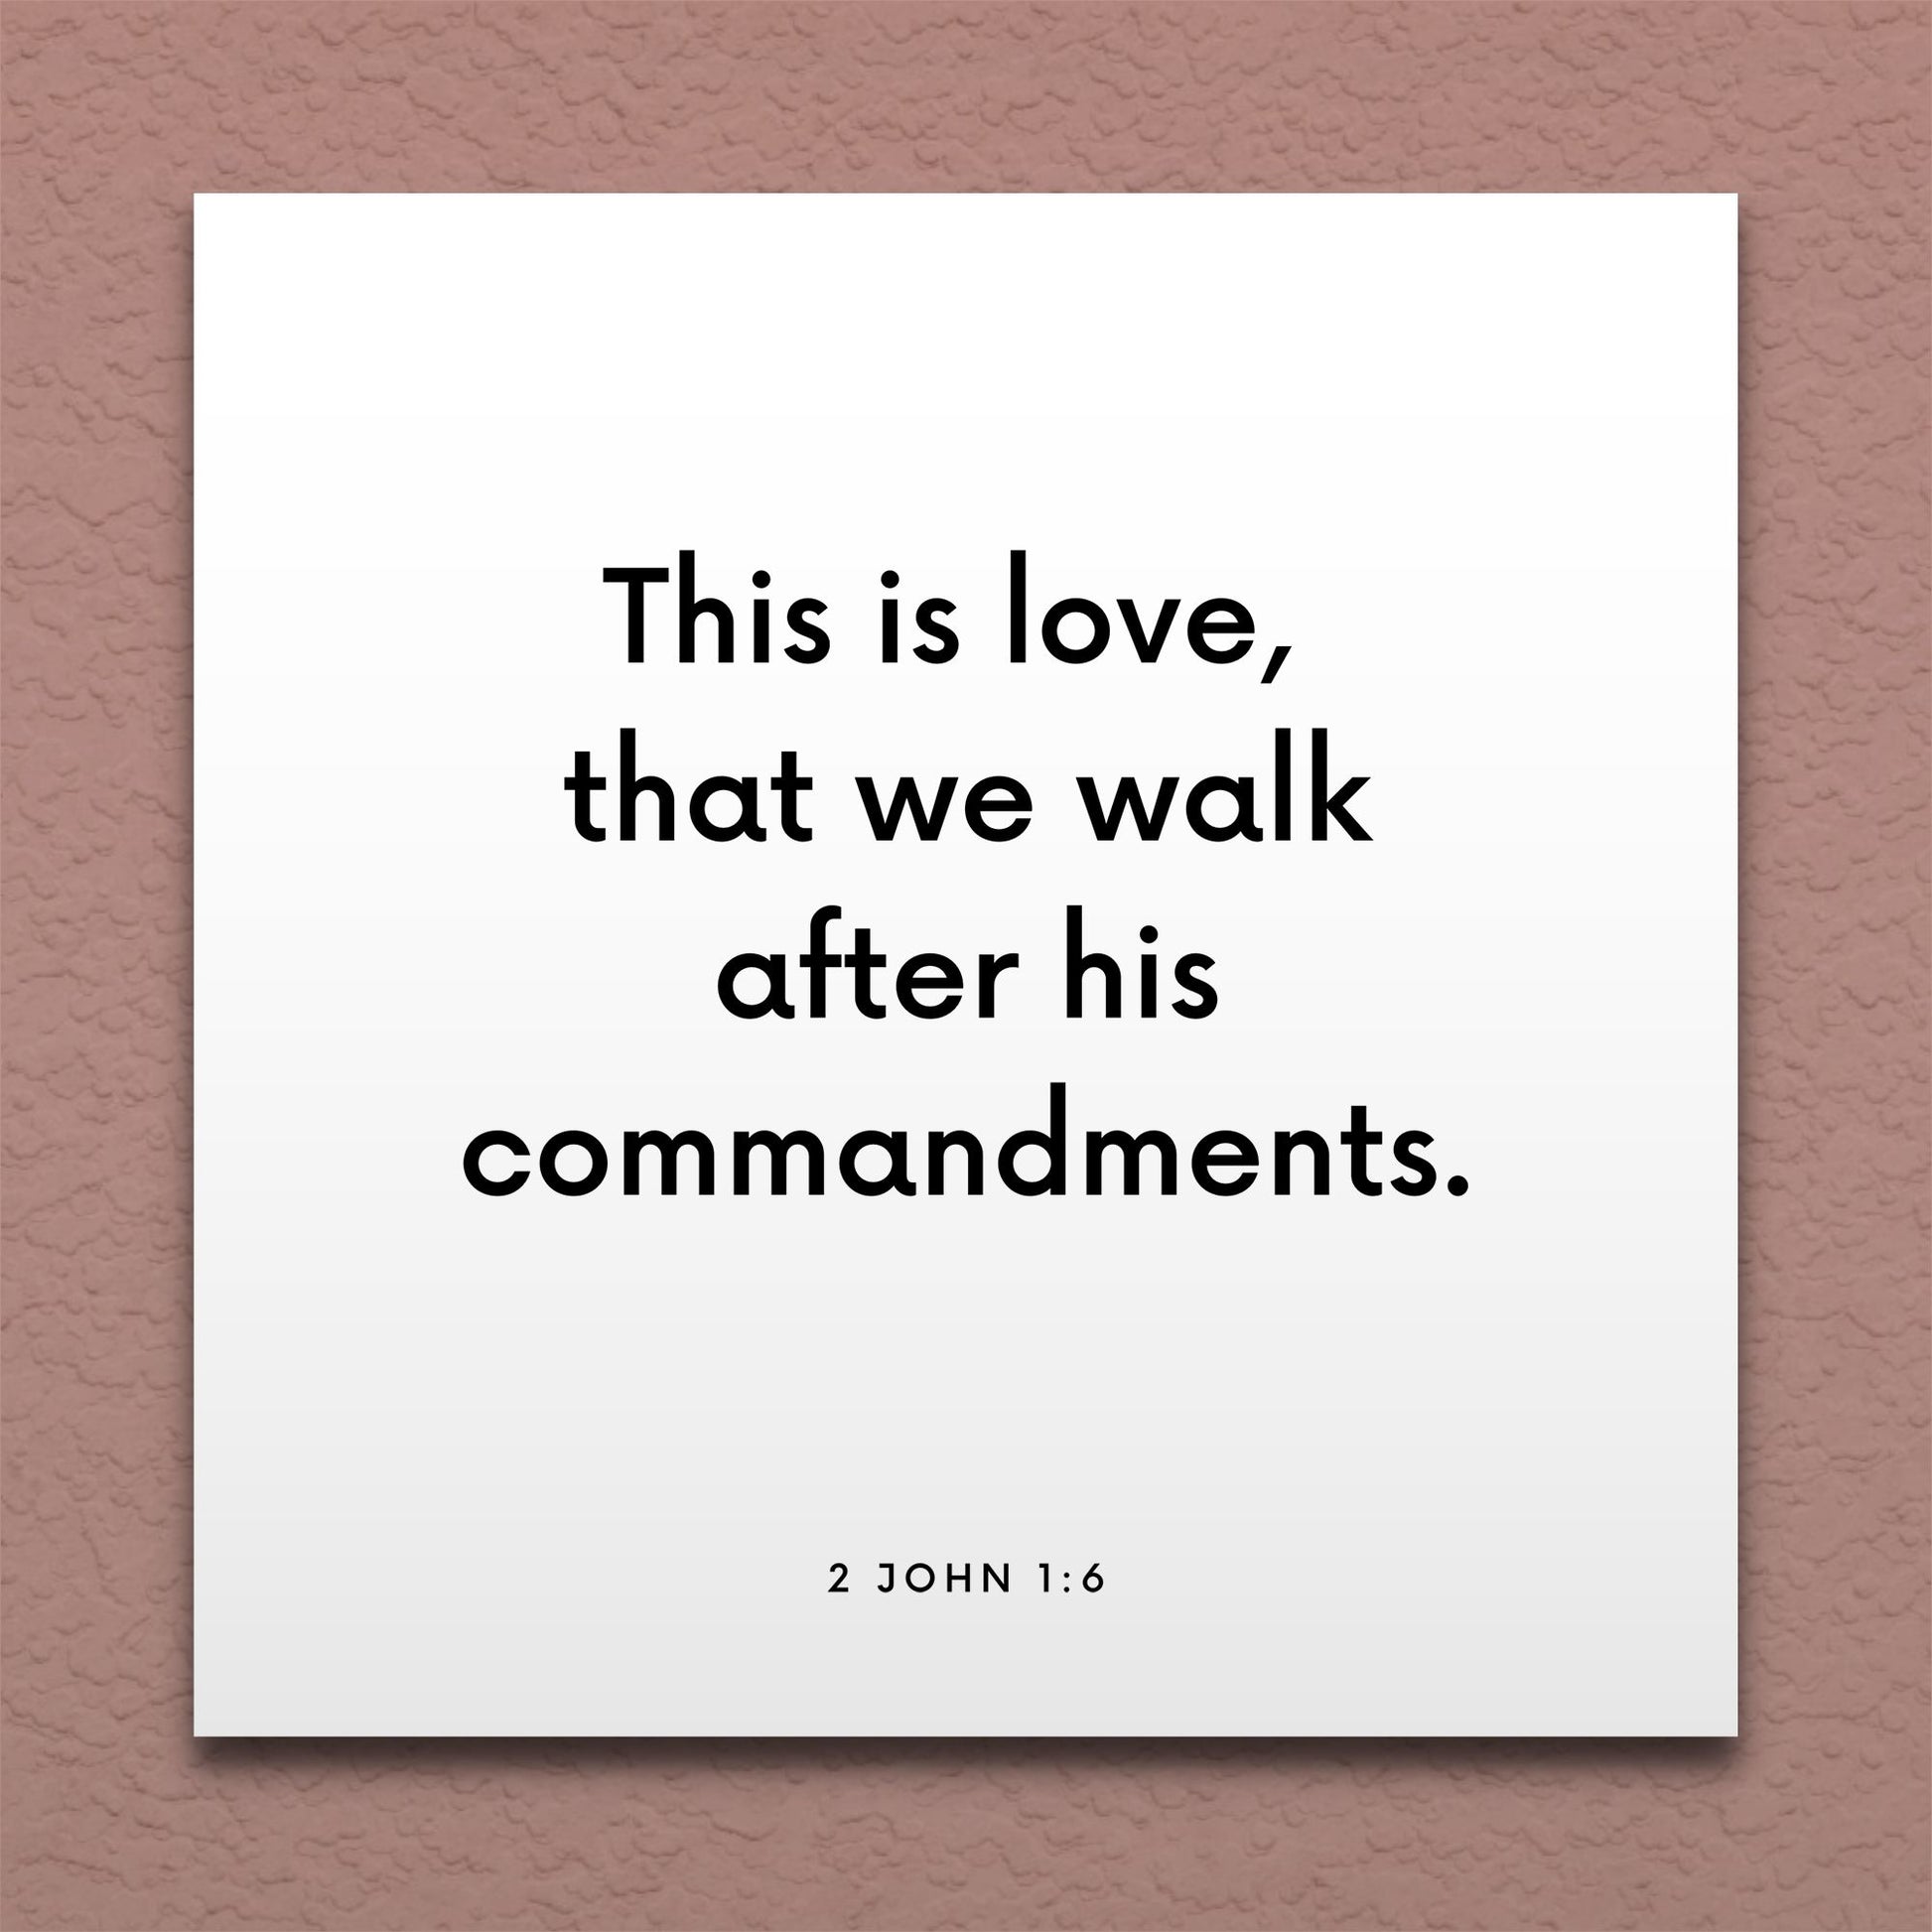 Wall-mounted scripture tile for 2 John 1:6 - "This is love, that we walk after his commandments"